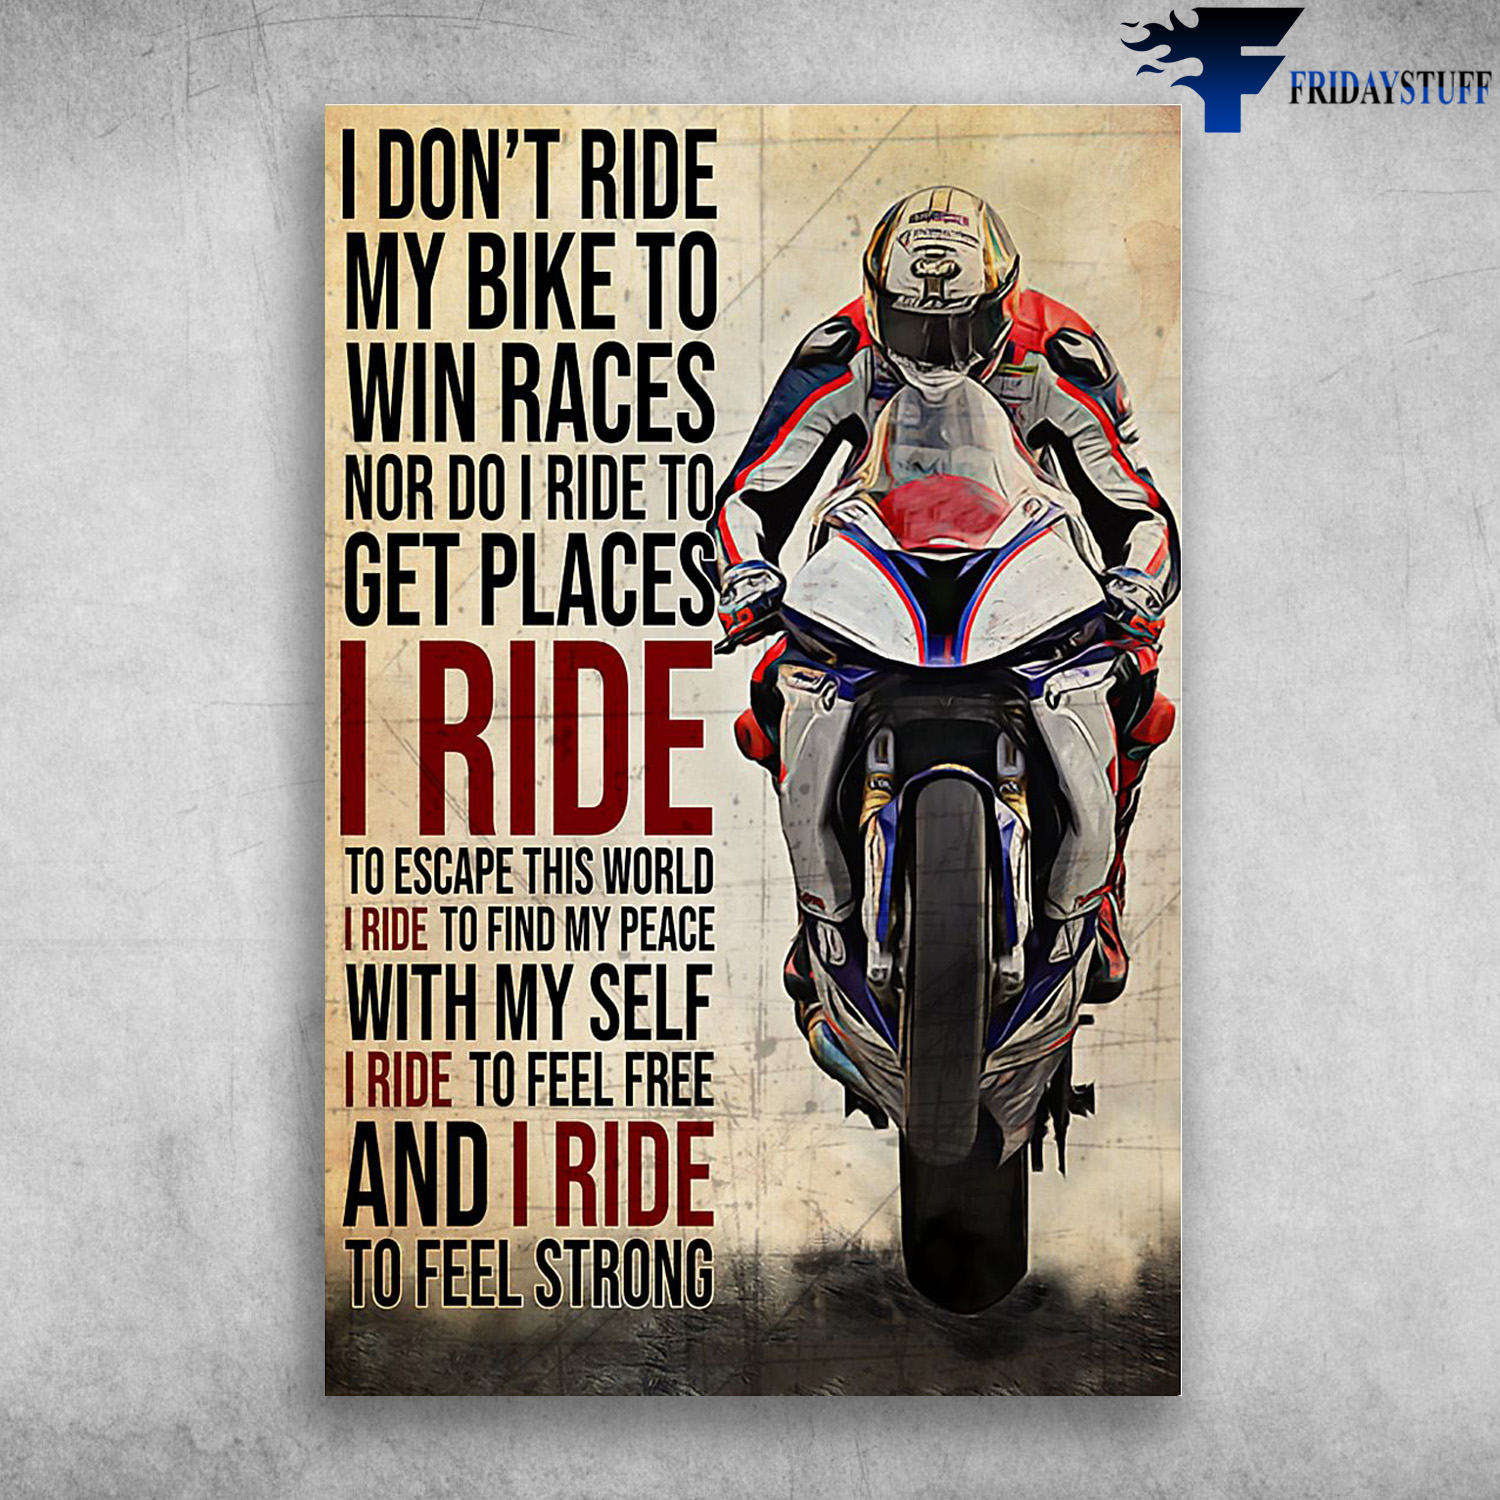 Man Riding Motorcycle - I Don't Ride My Bike To Win Races, I Ride To Escape This World